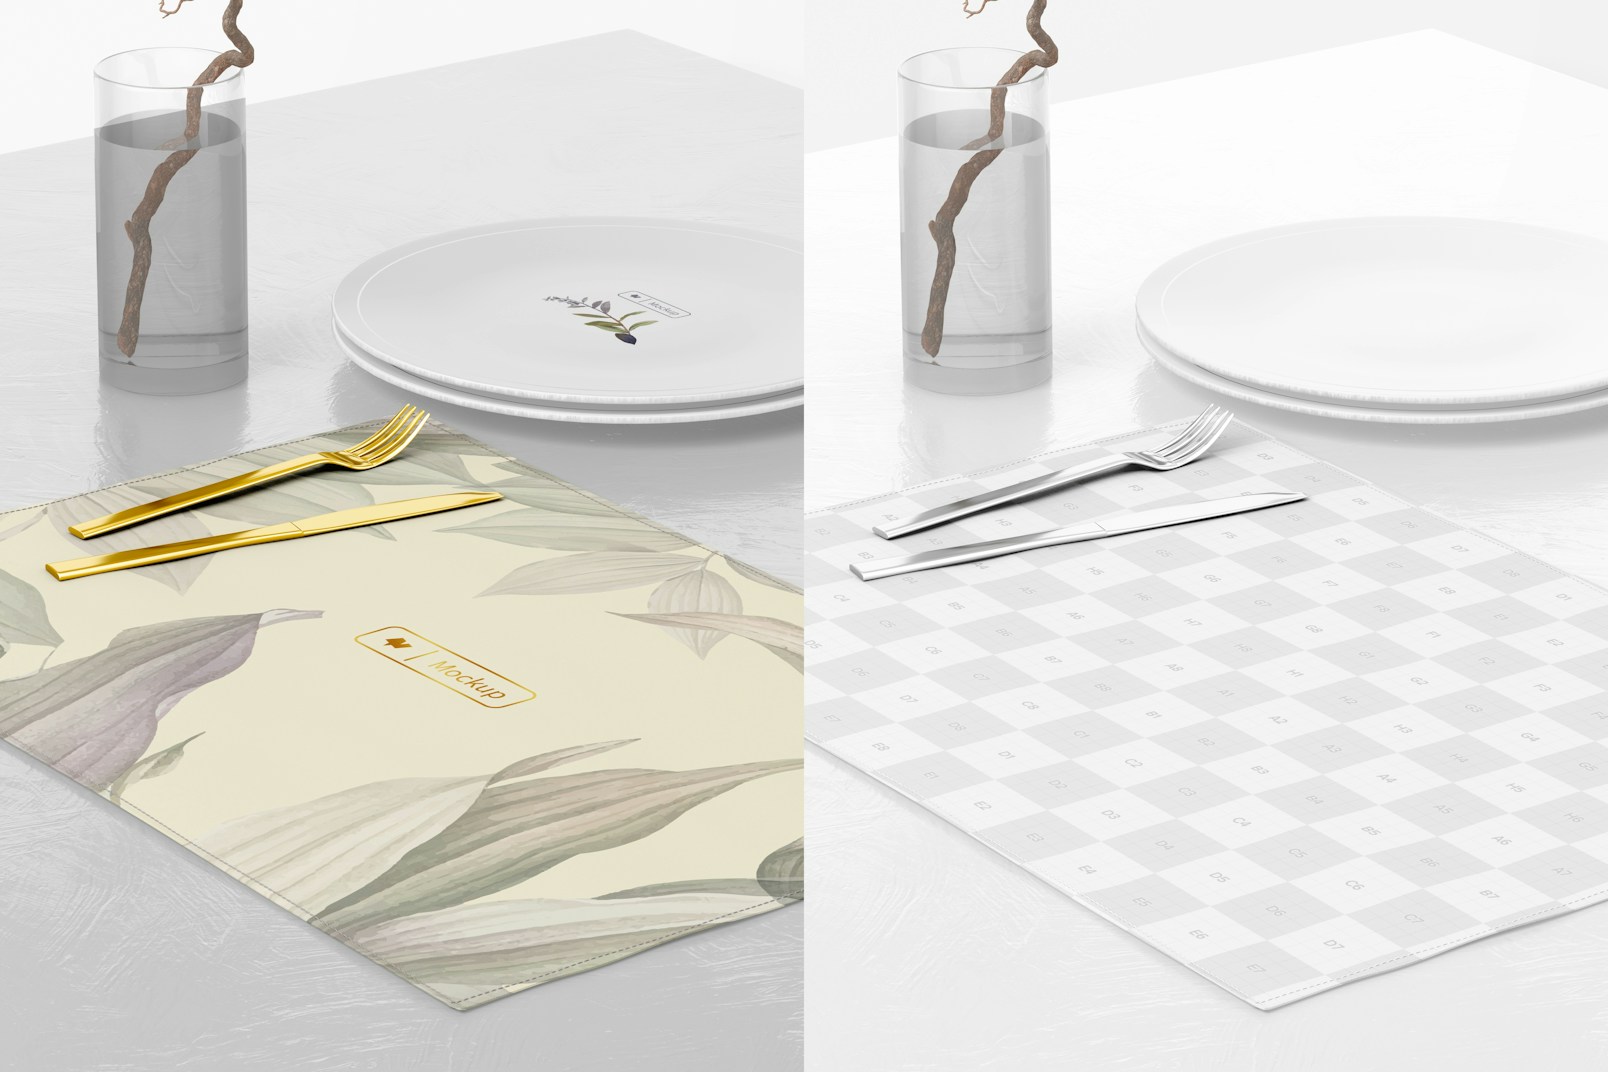 Fabric Placemat Mockup, Perspective View